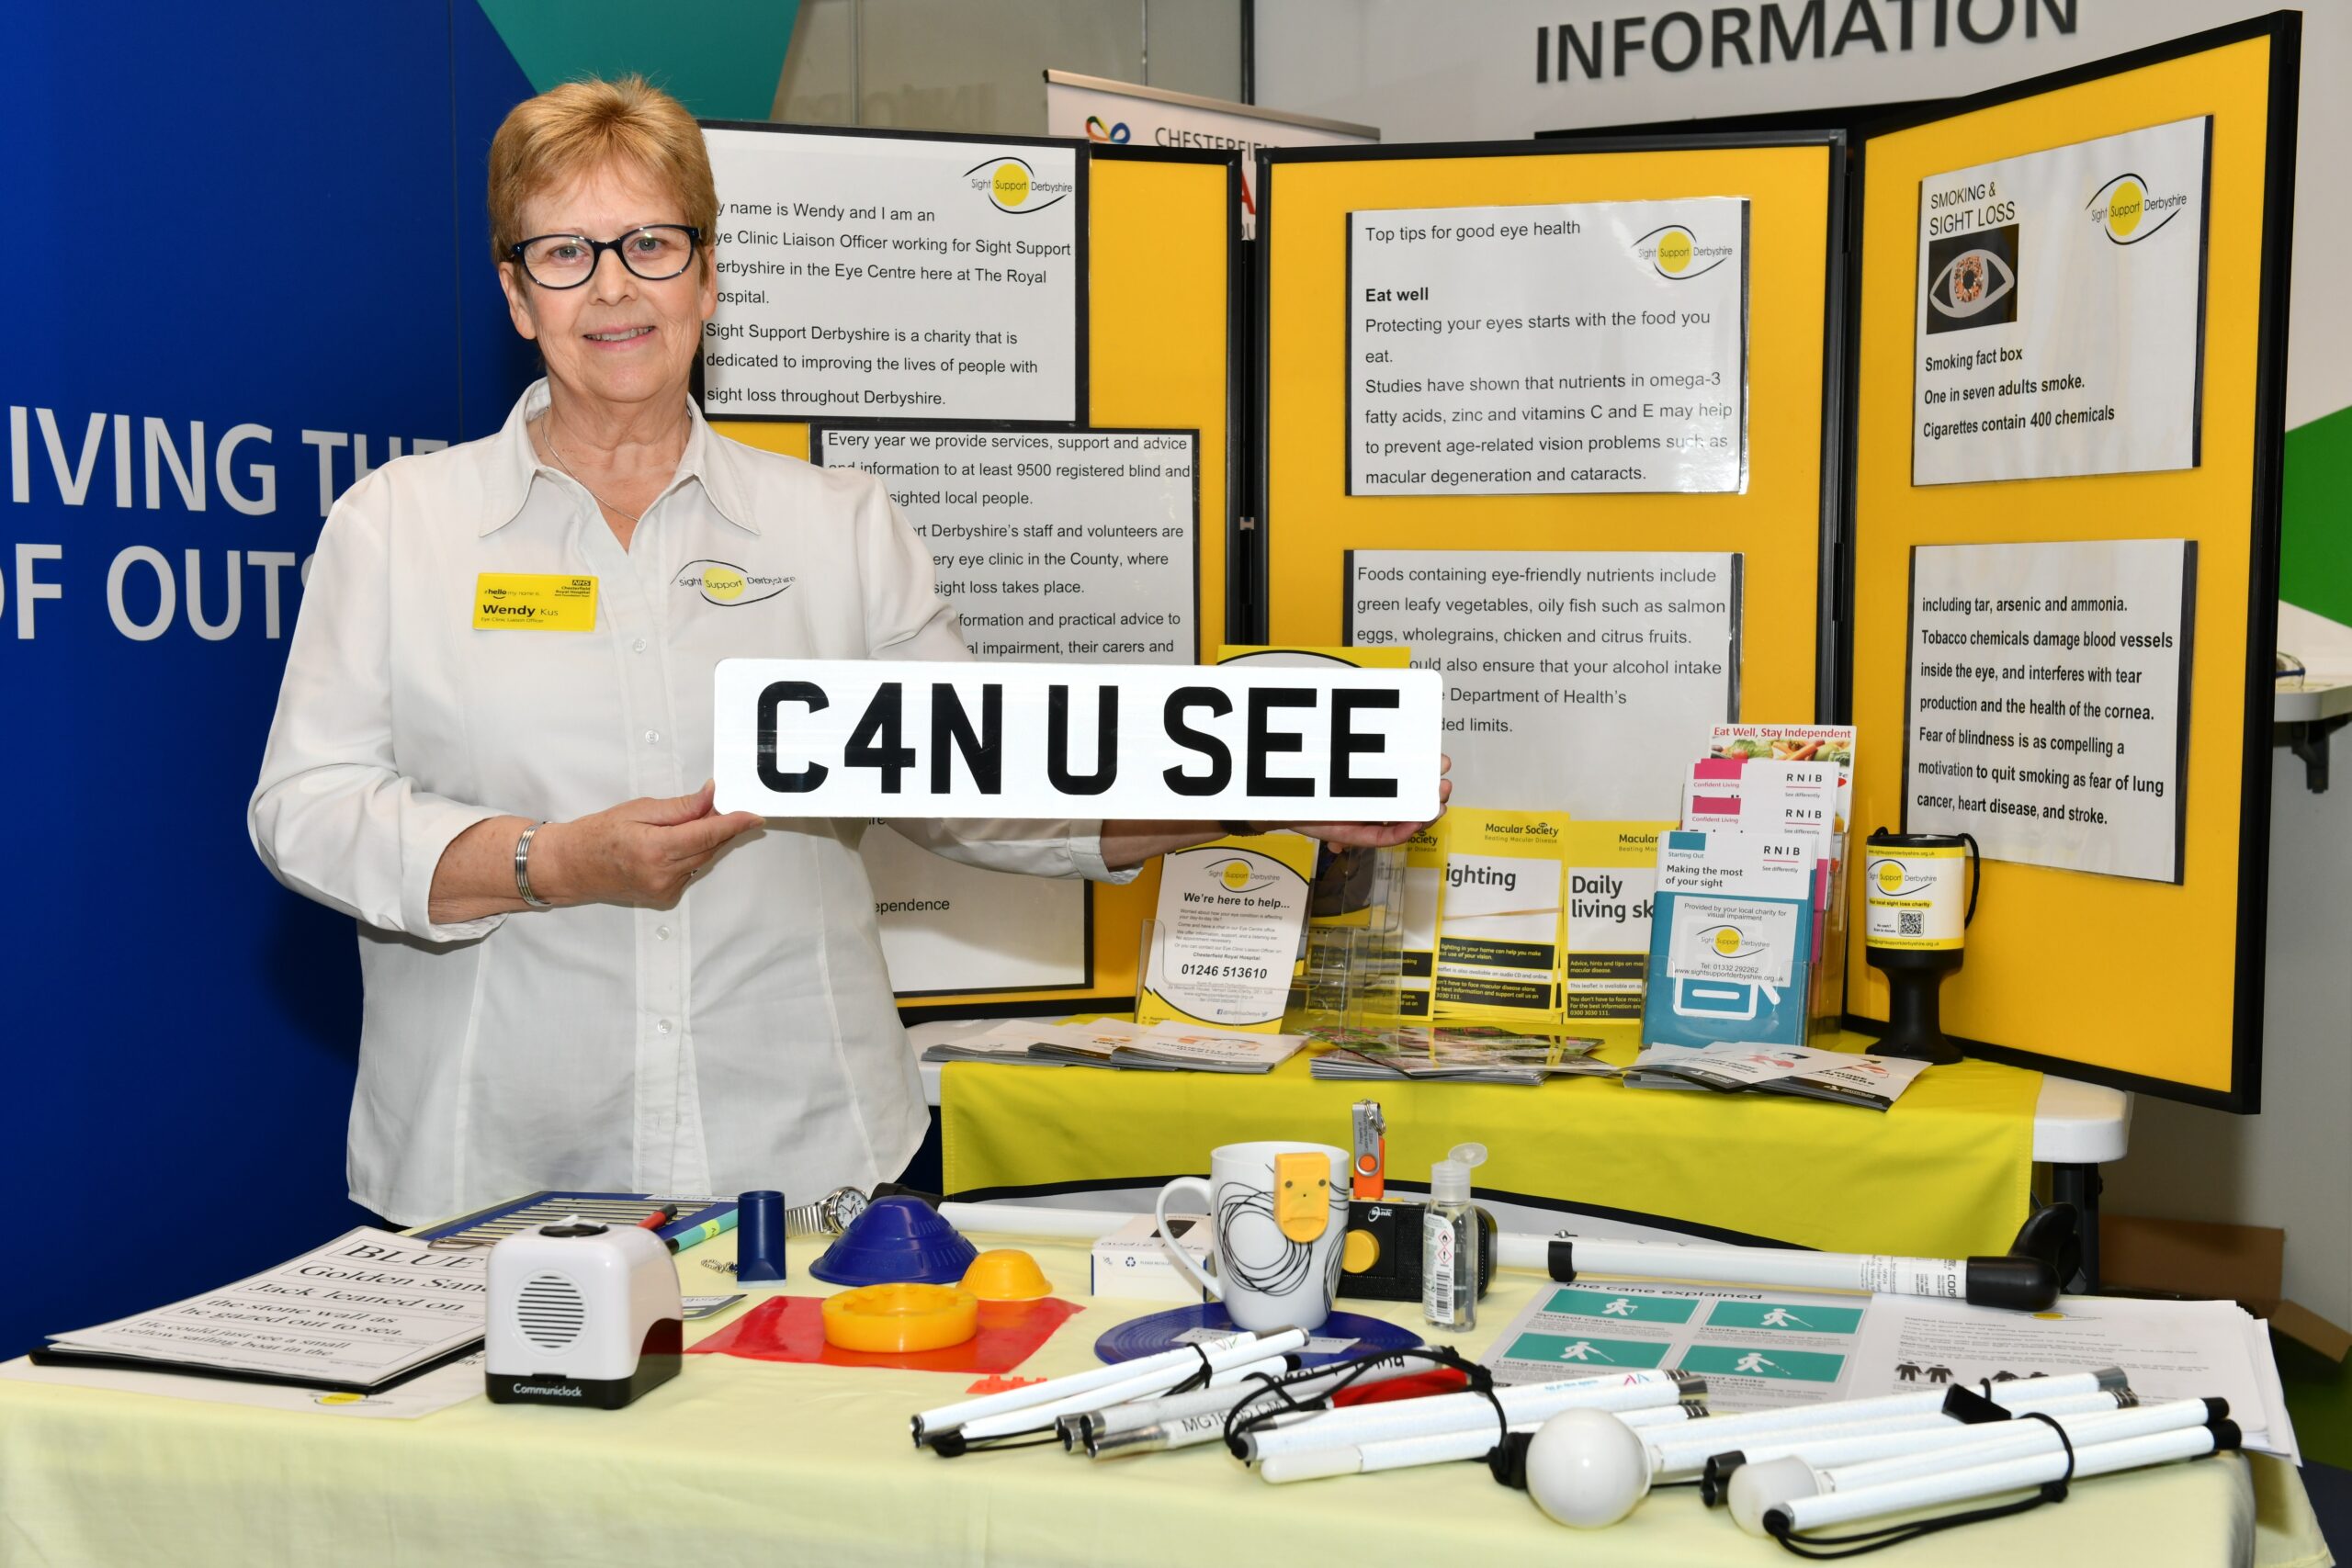 Wendy is wearing a white shirt and is standing in front of a display of leaflets, equipment (talking clocks, canes etc). She is holding a care registration plate which reads C4N U SEE